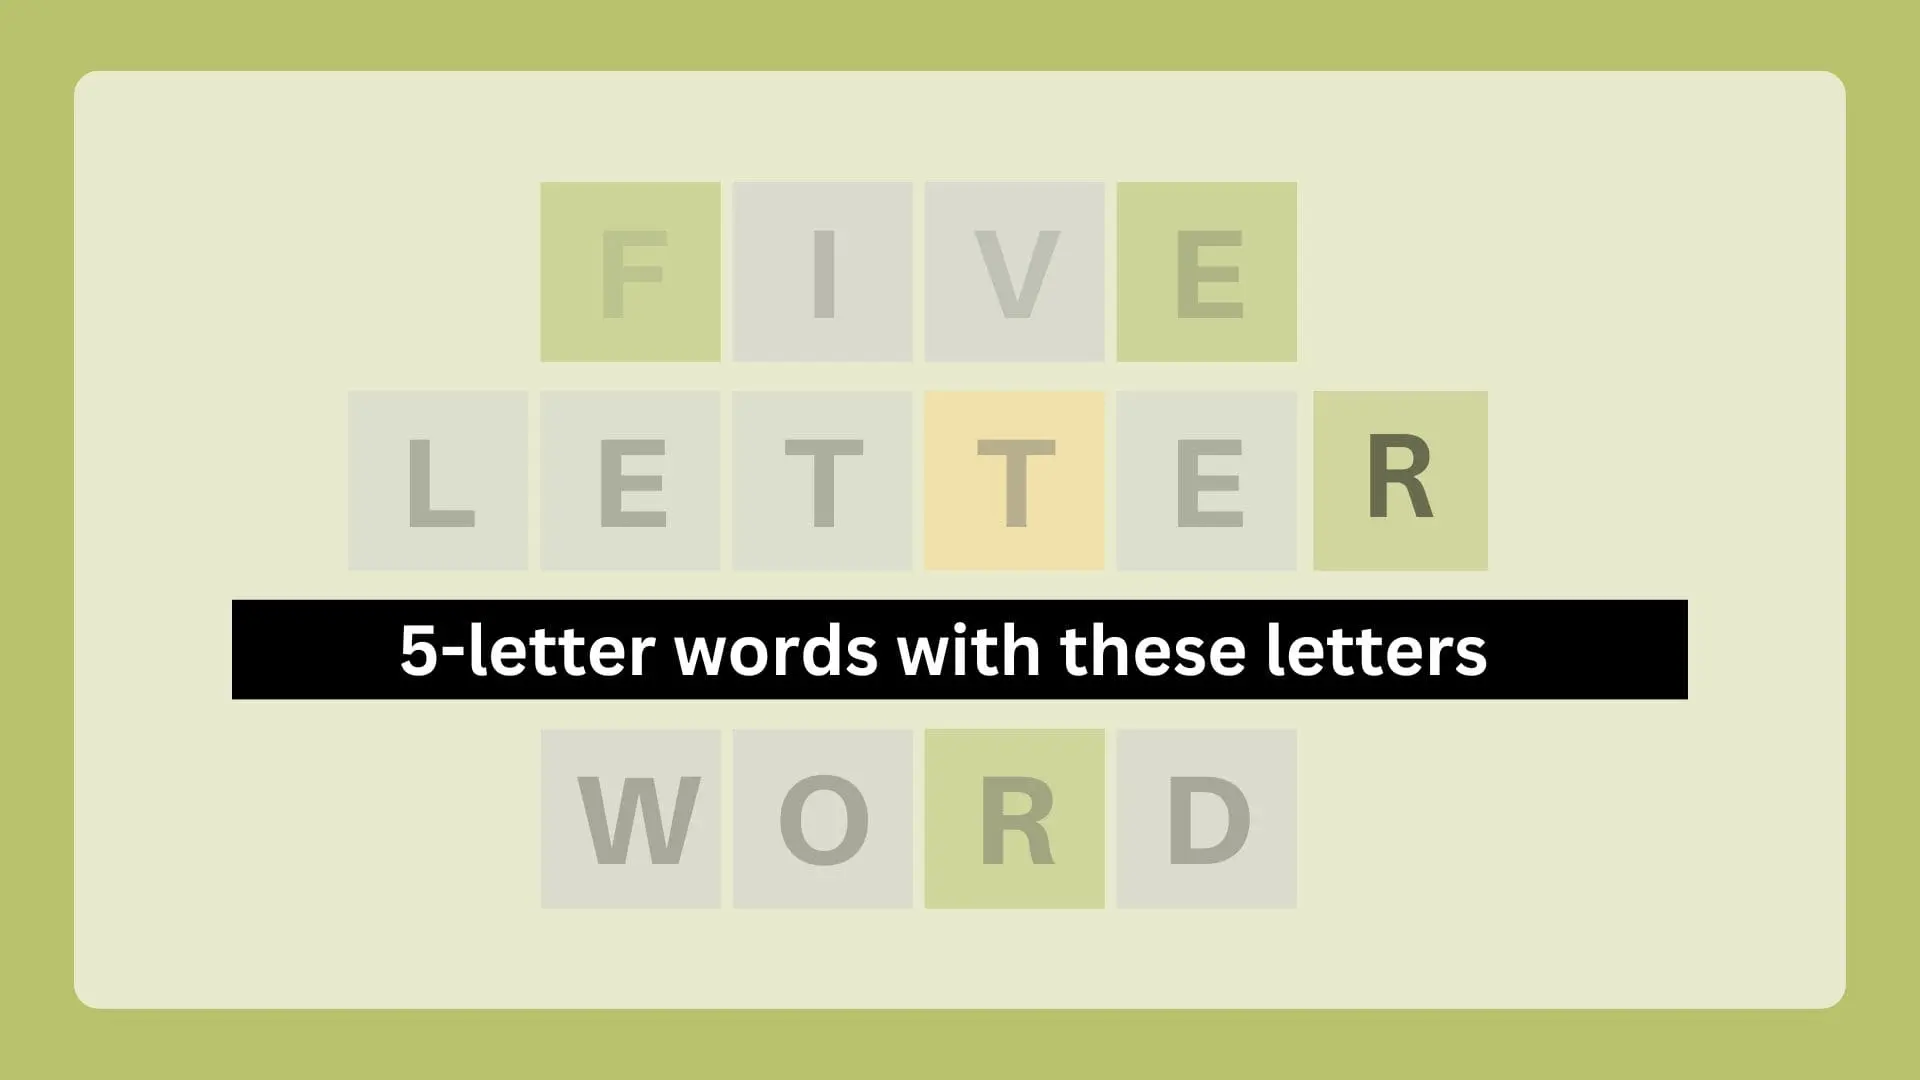 Explore the charm of 5-letter words with these letters 